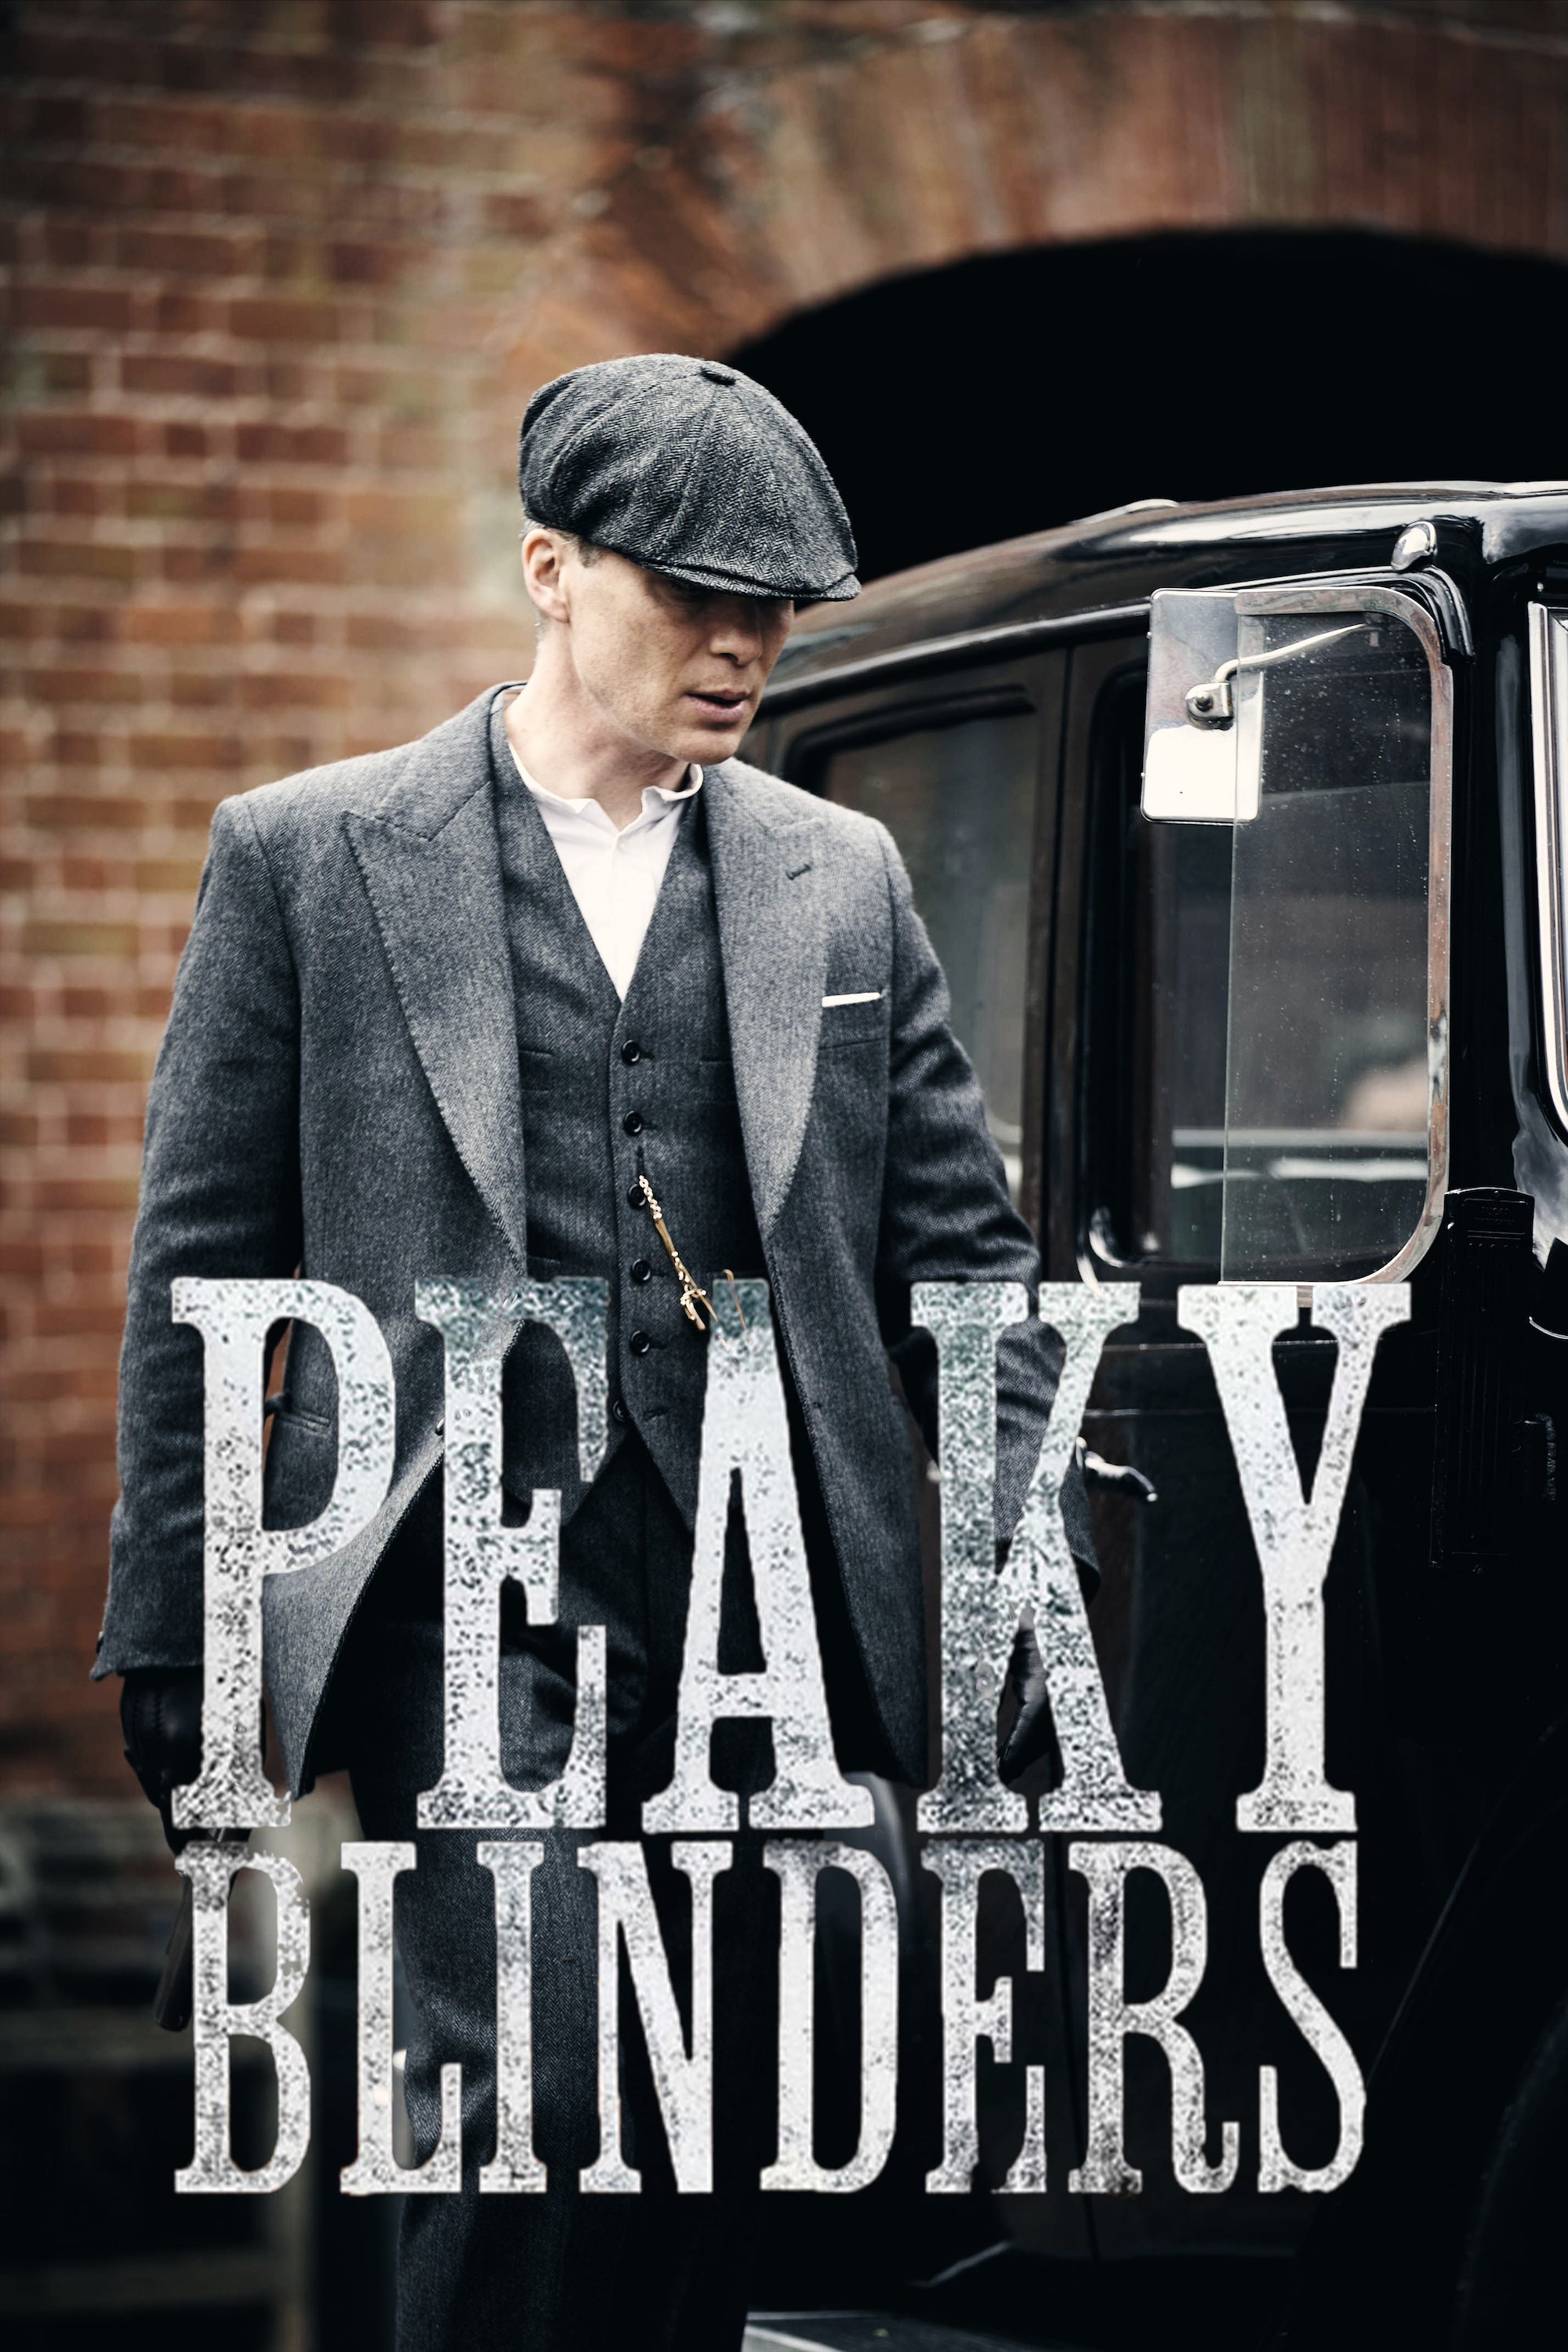 Peaky Blinders iconic pictures and posters